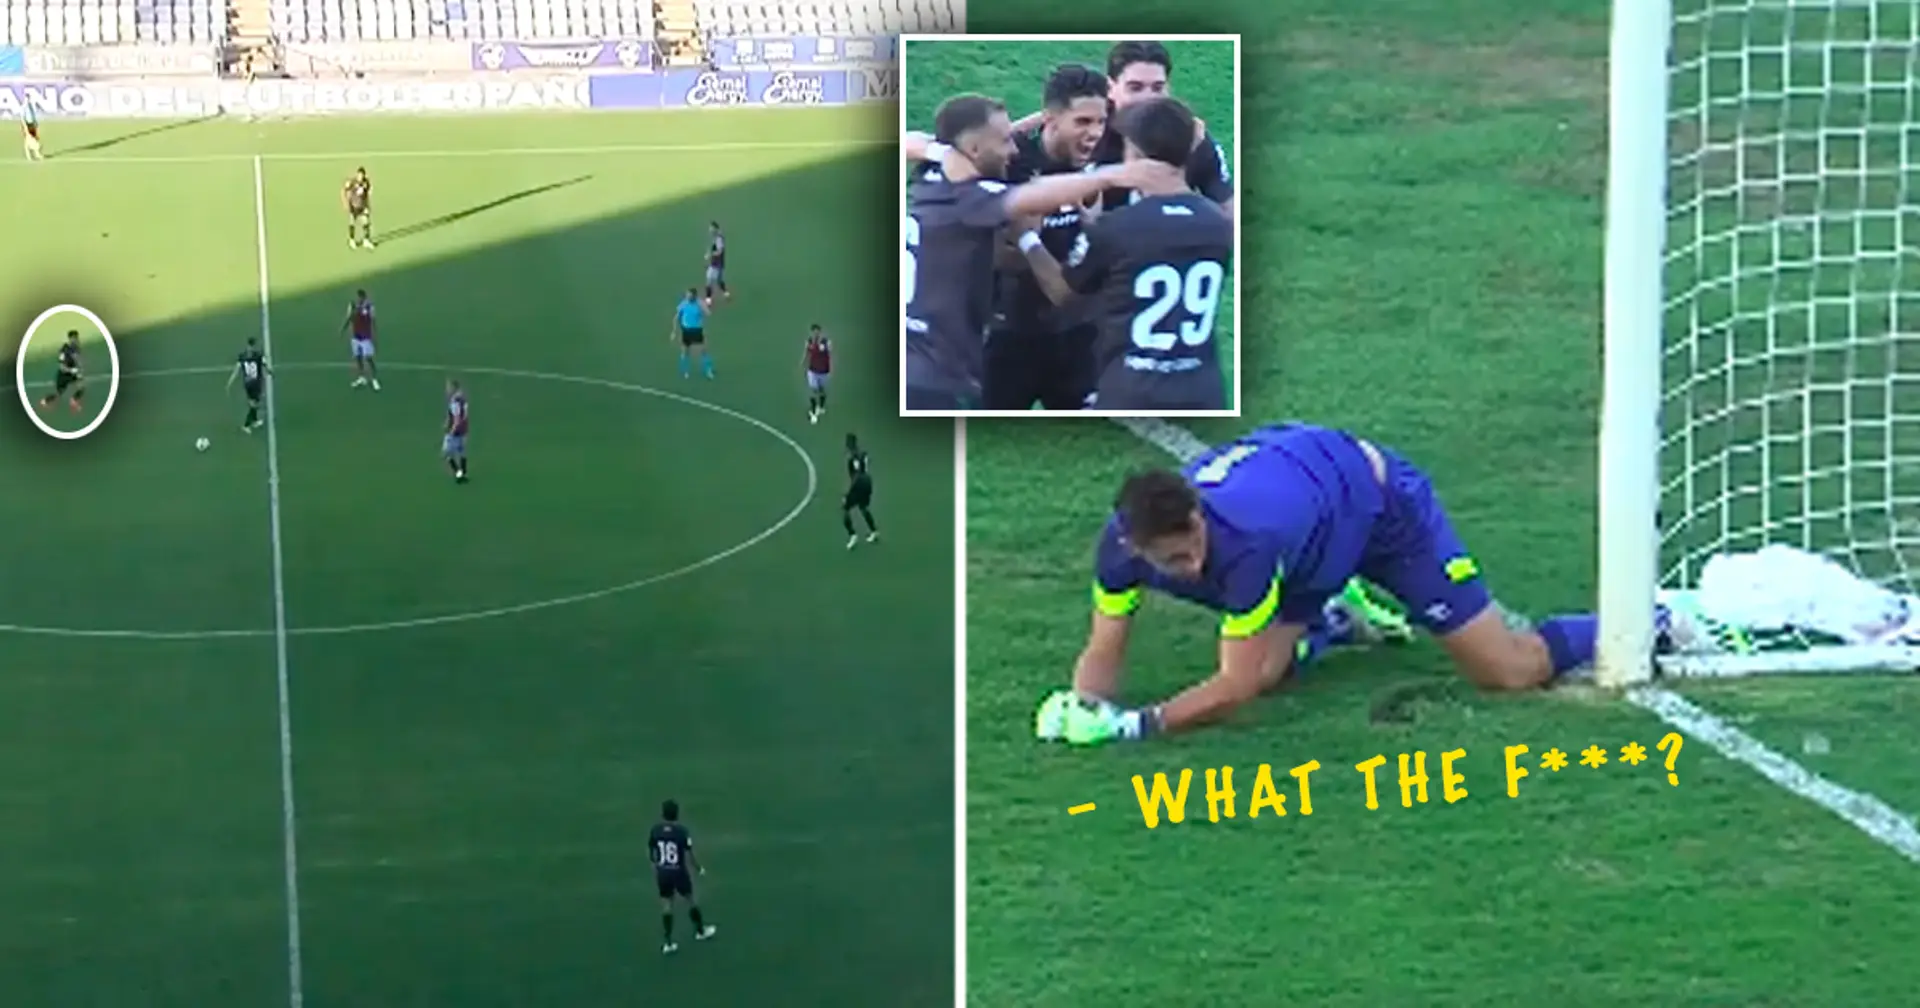 Player with 103 appearances for Barca scores crazy goal from his own half